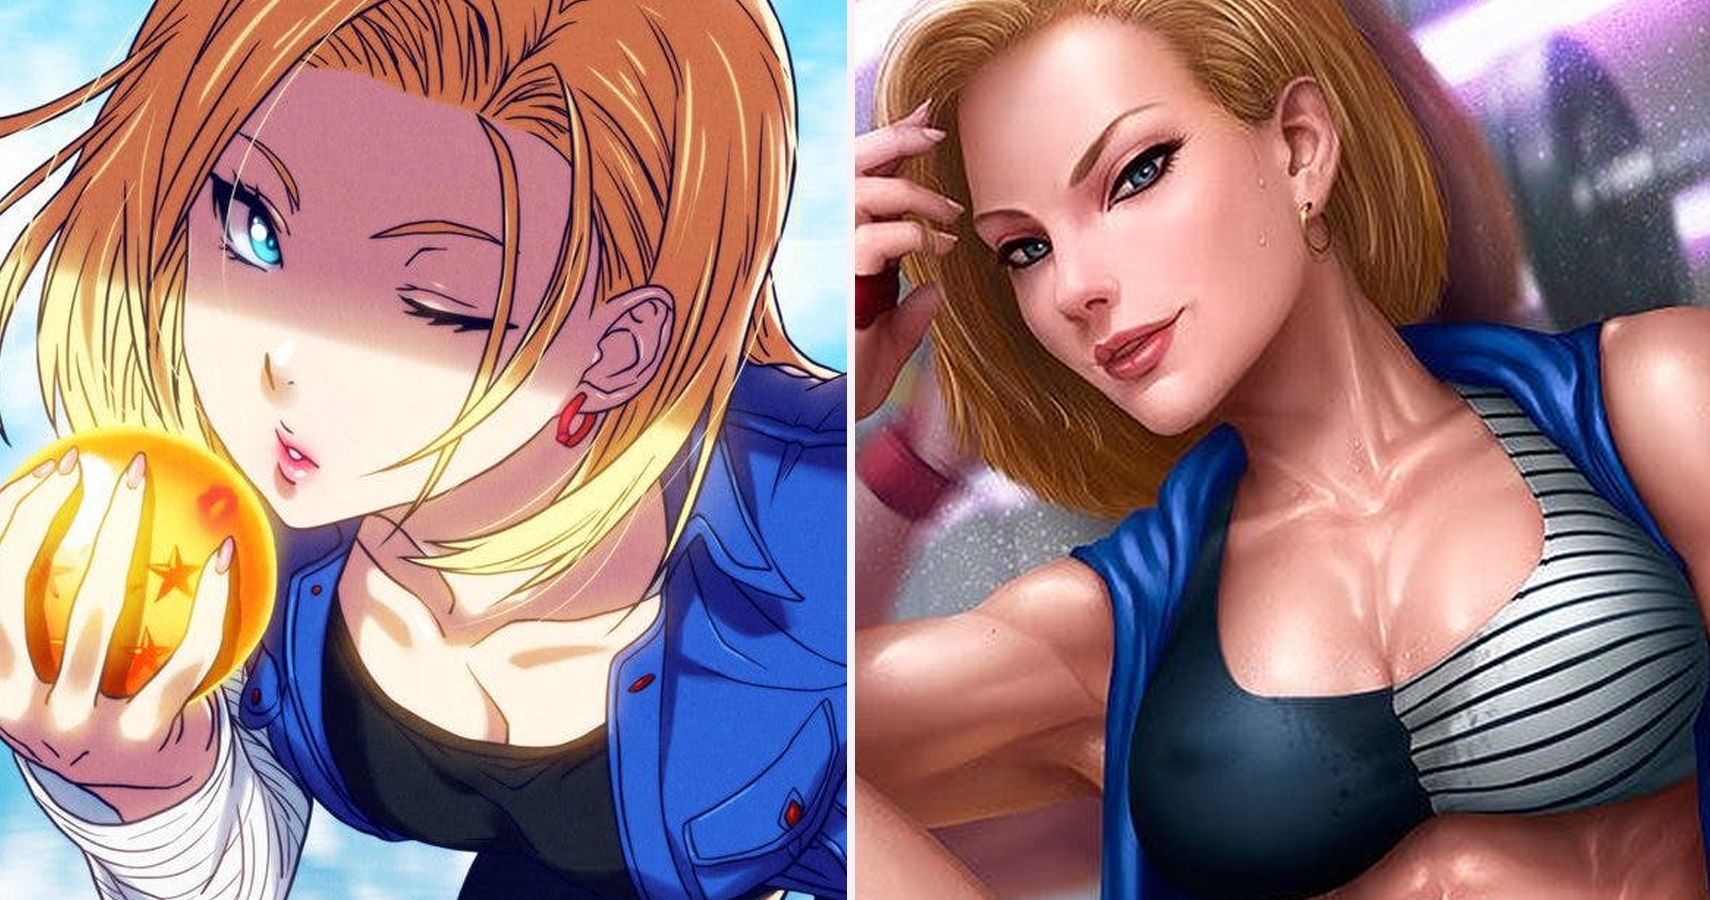 Home " fanarts " characters " android 18. 